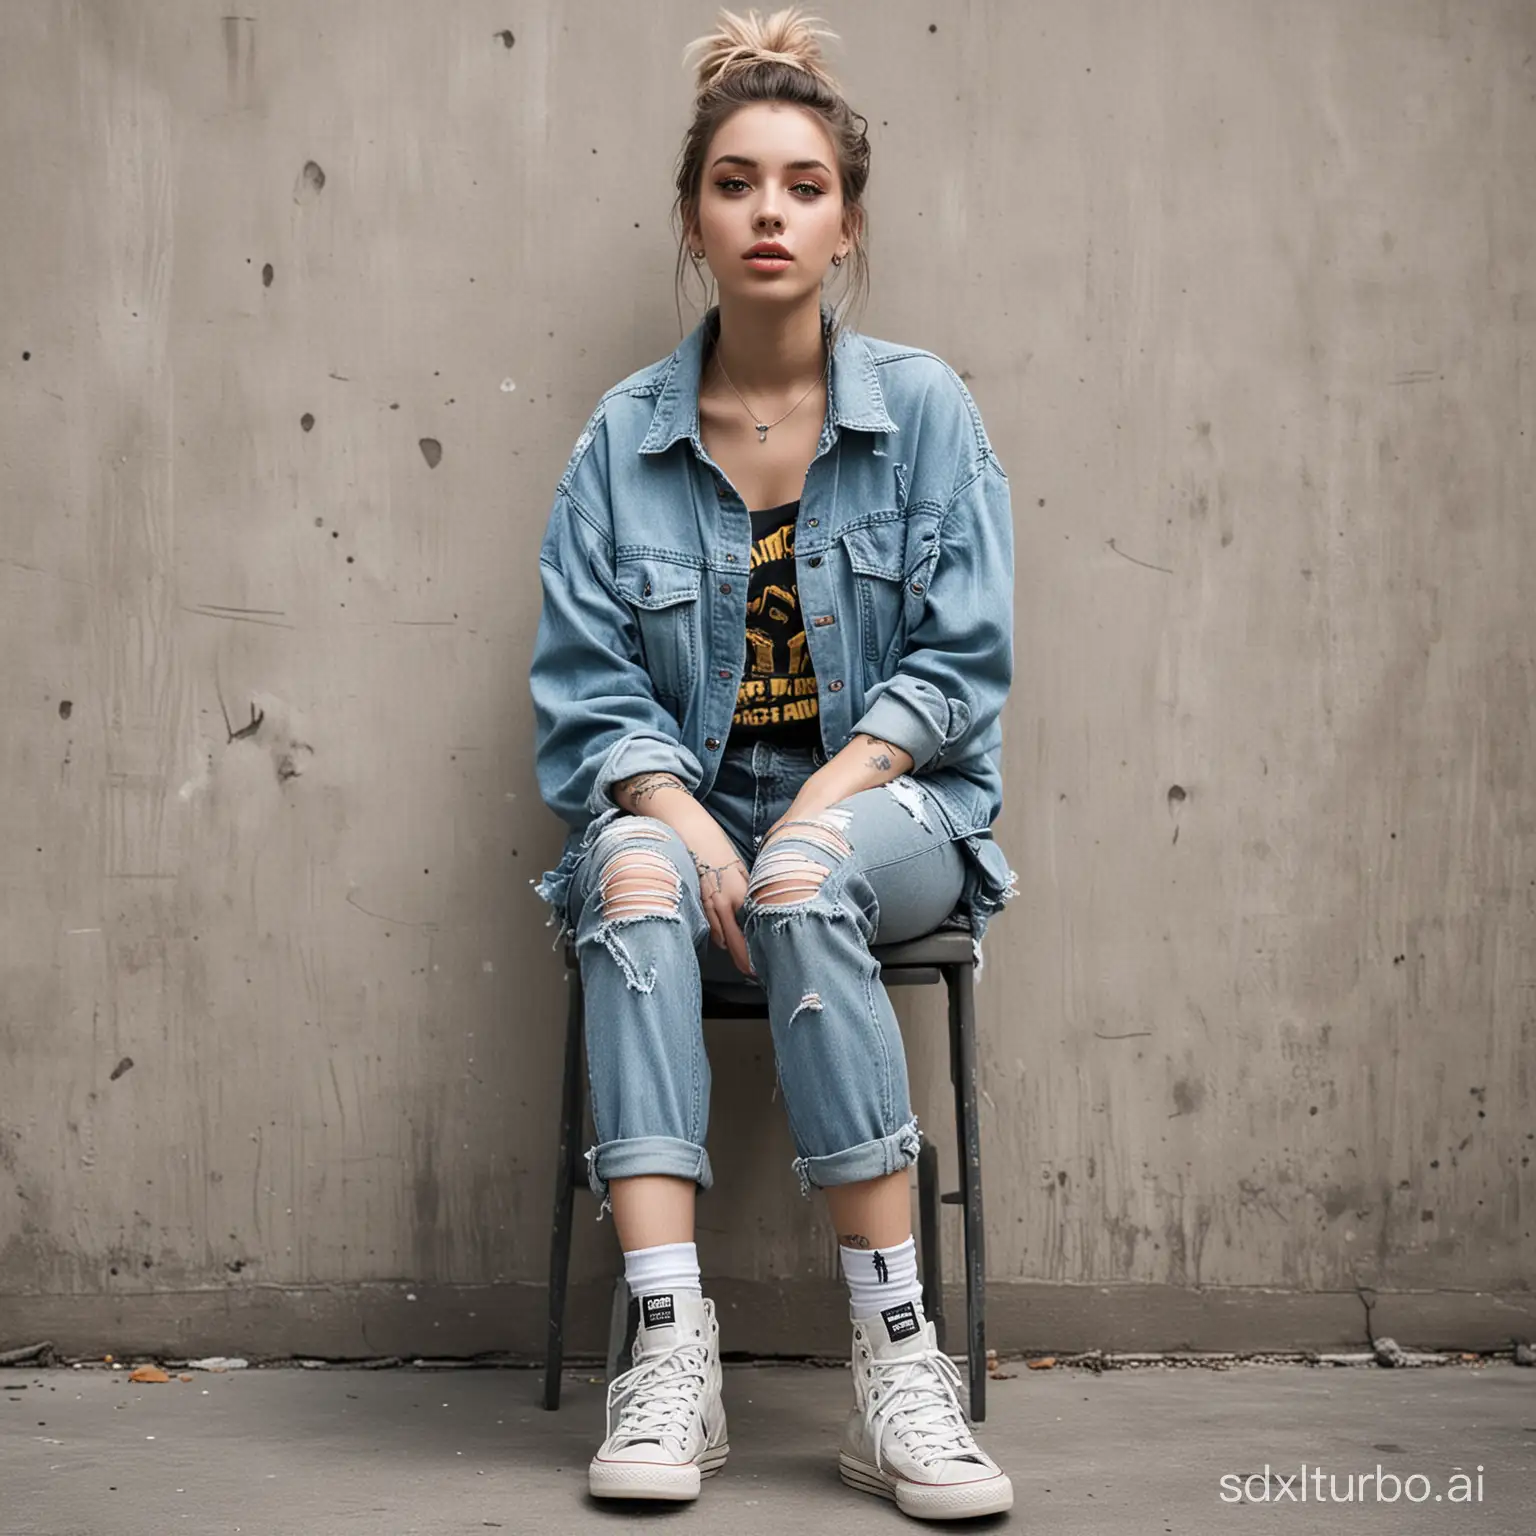 Grunge-Fashion-Girl-Portrait-in-Distressed-Layers-and-Neon-Accents